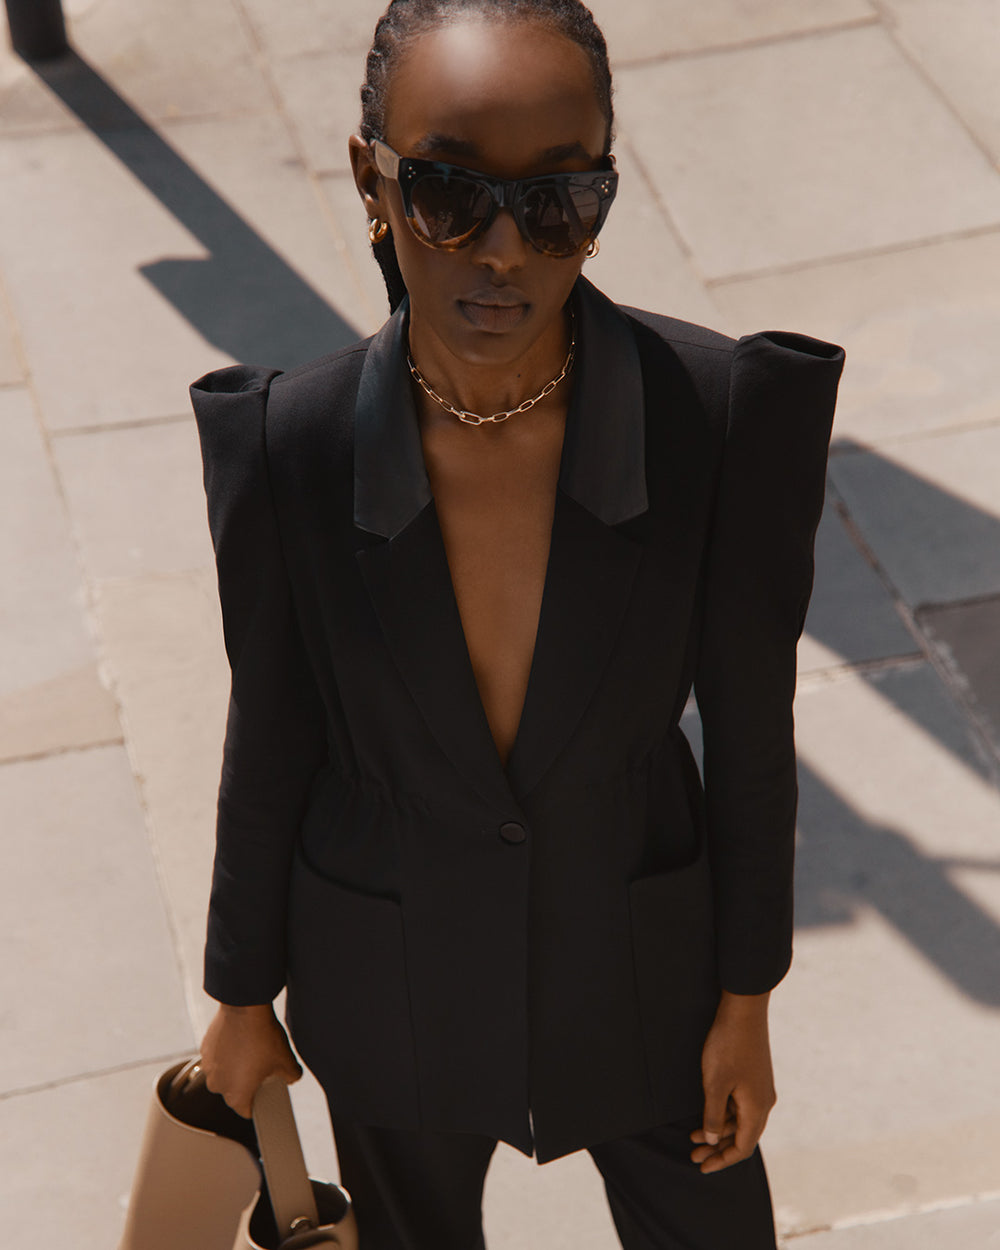 Woman in a suit standing outdoors with sunglasses and a handbag.